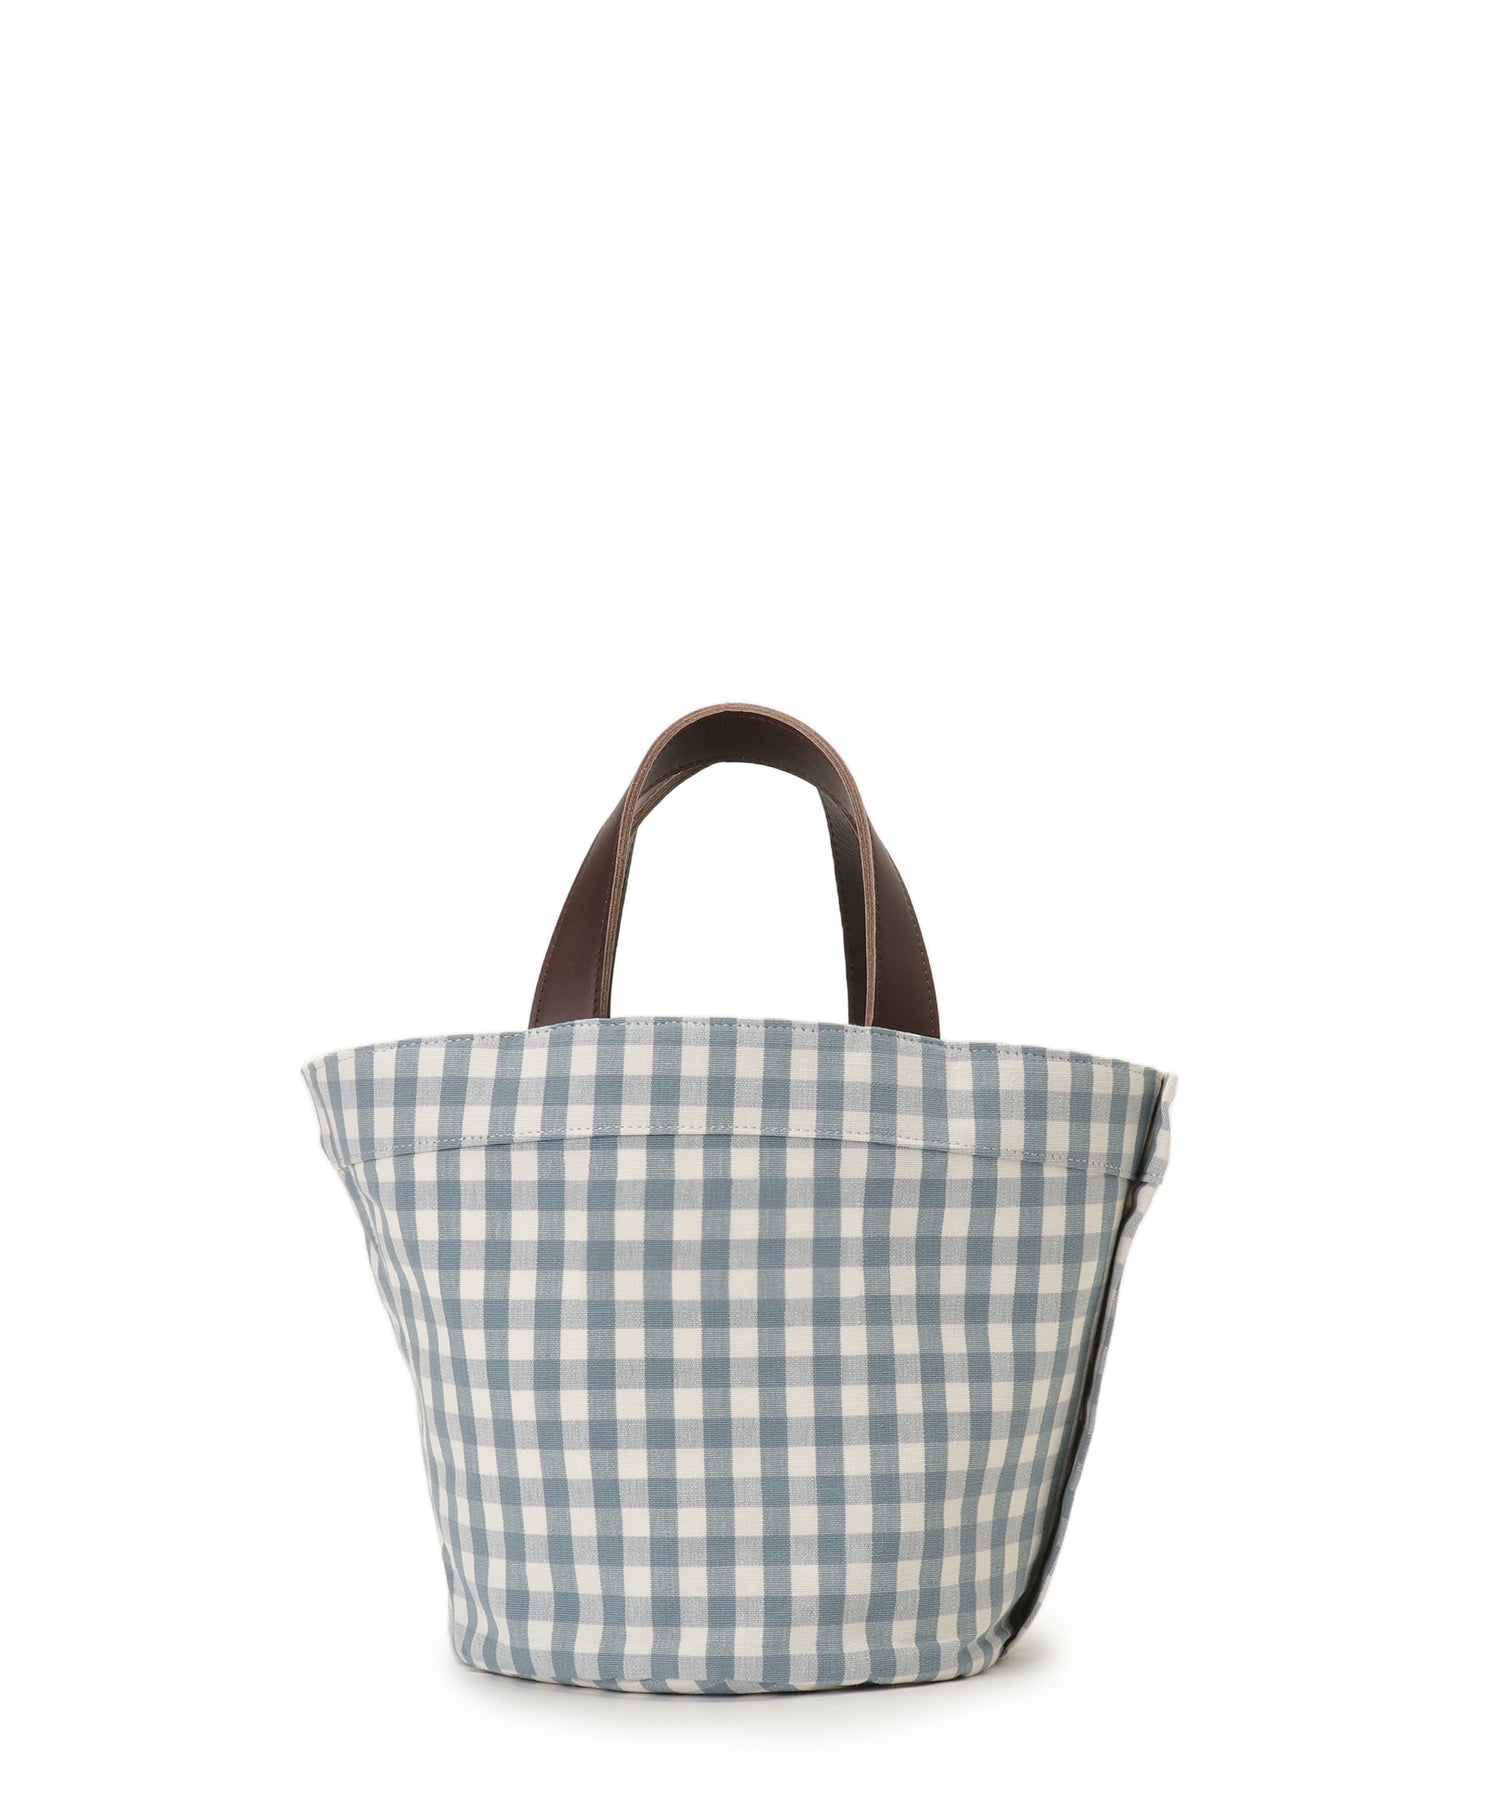 Gingham check tote S— LUDLOW STORE